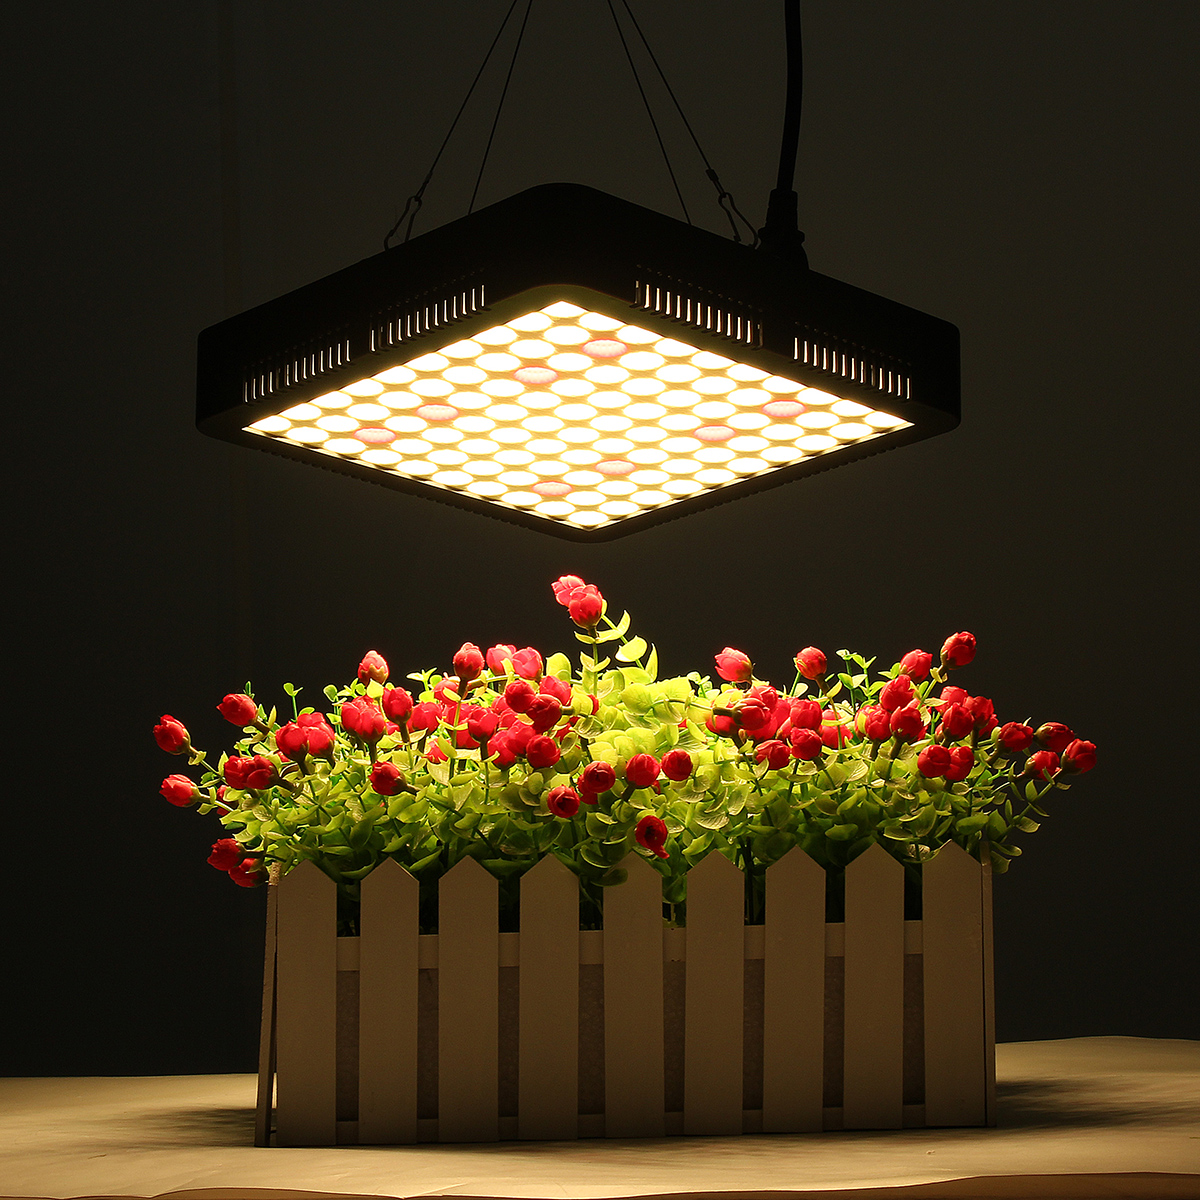 300W-LED-Grow-Light-Full-Spectrum-Hydroponic-Indoor-Plant-Flower-Growing-Bloom-Lamp-AC85-265V-1728585-10